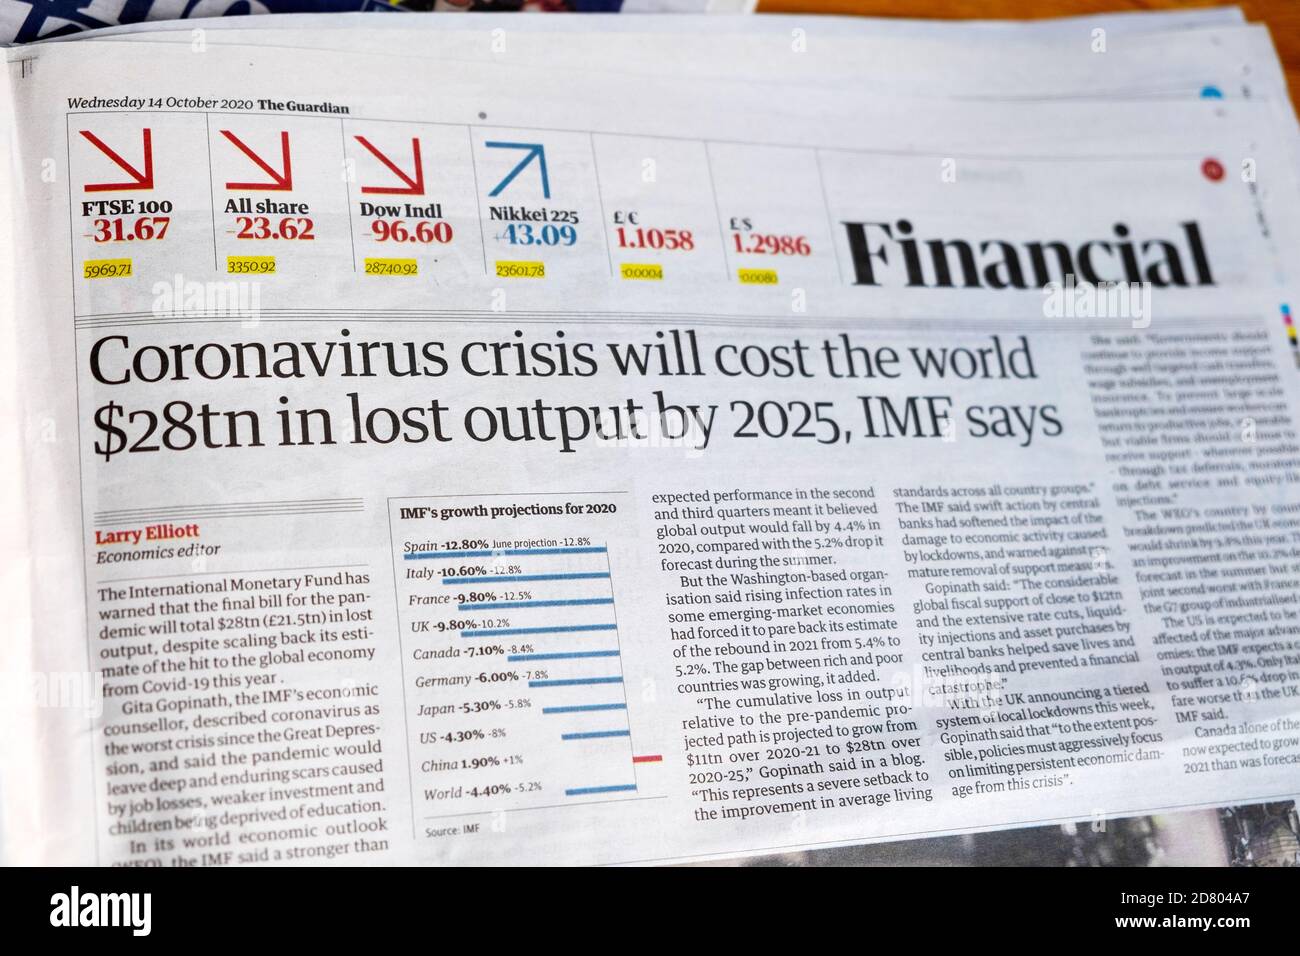 'Coronavirus crisis will cost the world $28tn in lost output by 2025, IMF says' Financial newspaper headline article 14 October 2020 London England UK Stock Photo